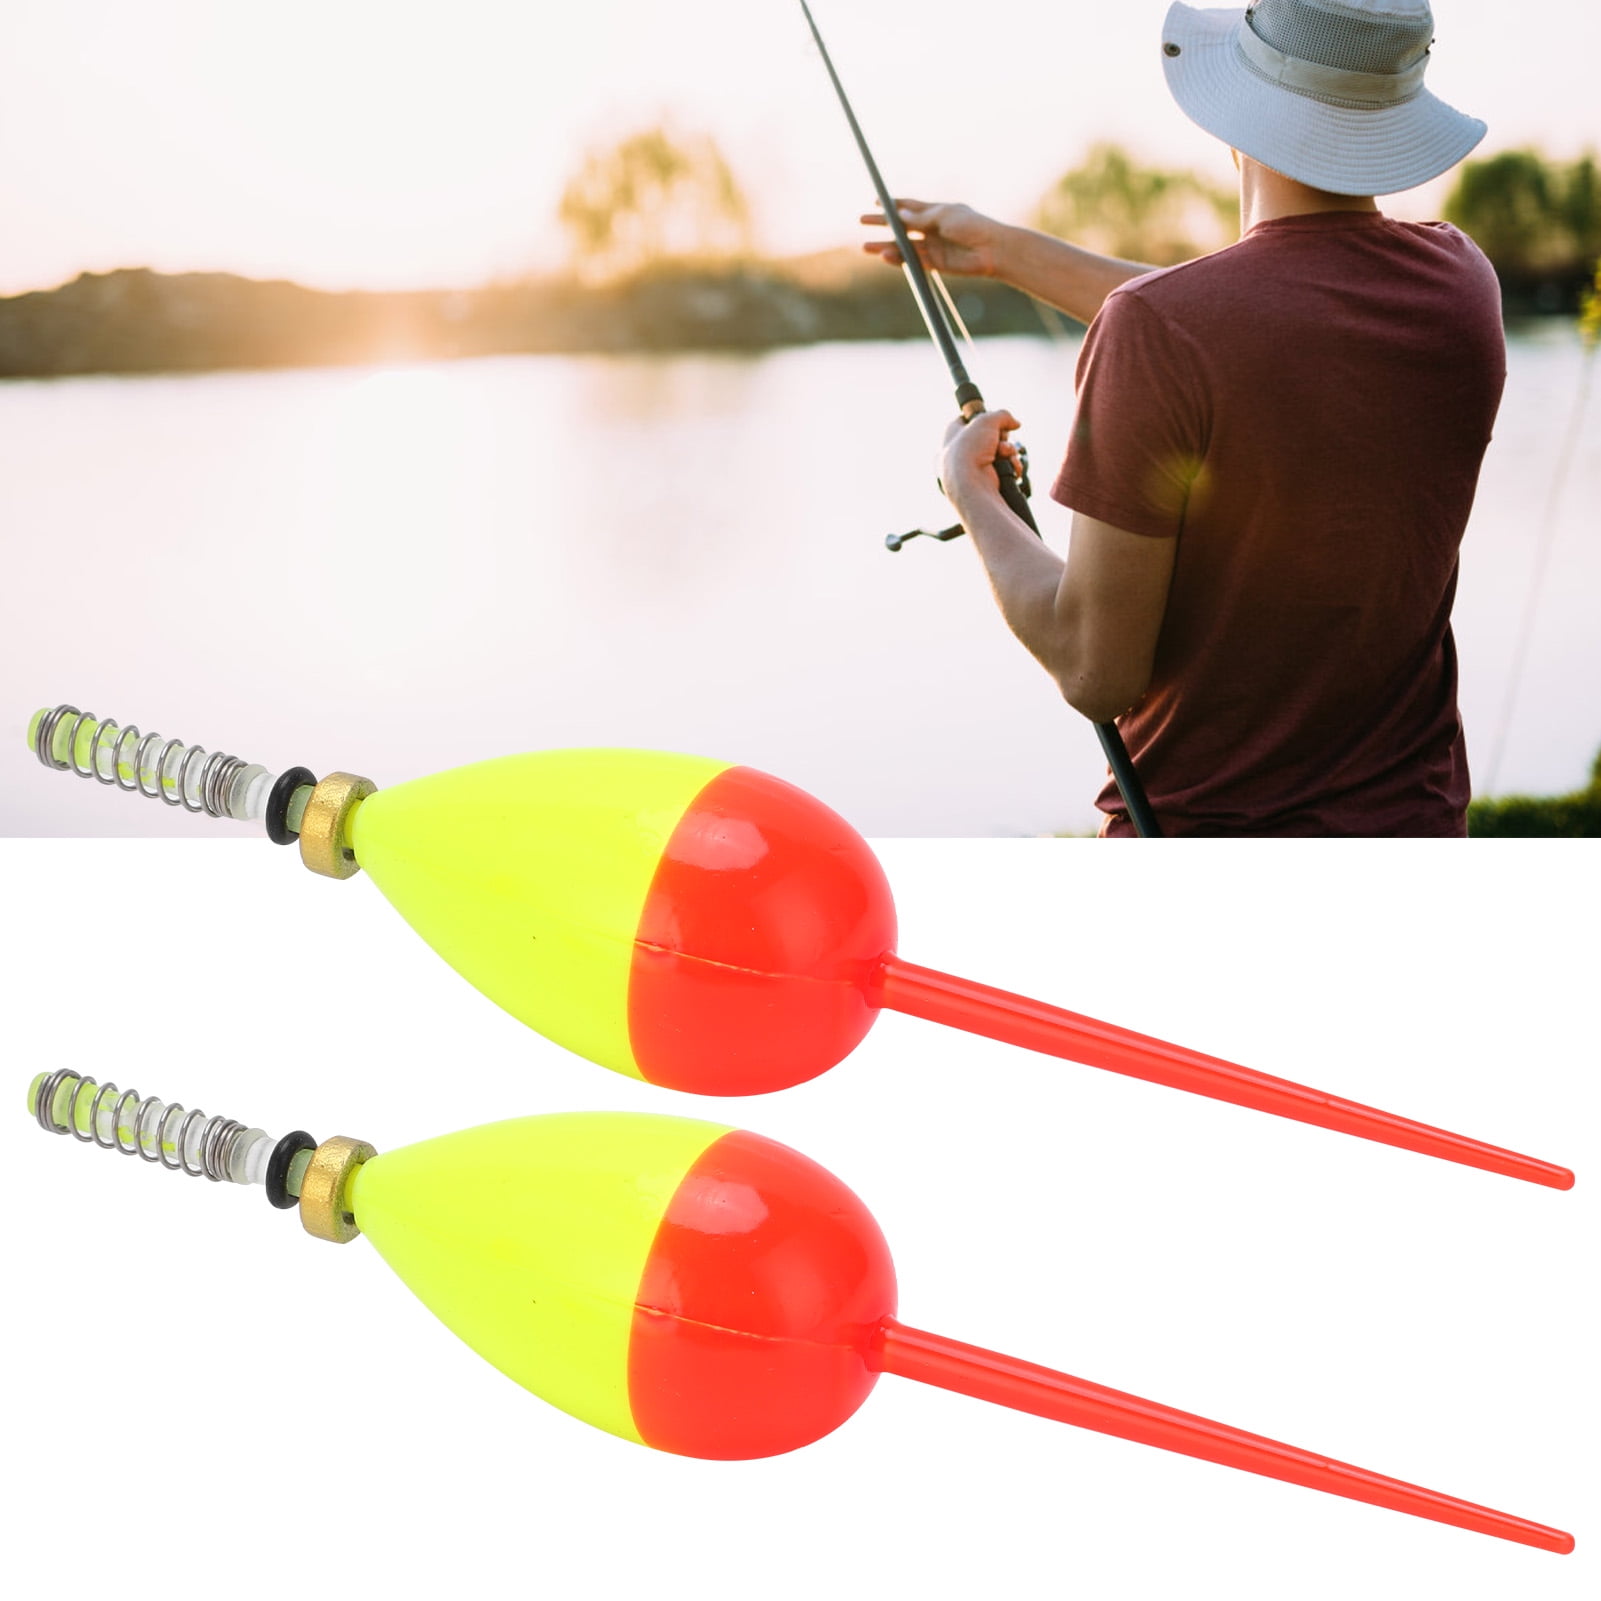 Fishing Bobber Floats, Portable Weighted Foam Slip Bobbers Professional For  Crappie Bass Trout Fishing For Sea Fishing Self-Locking, 6x2.05x1.14 Inches,Self-Locking,  6x1.62x1.14 